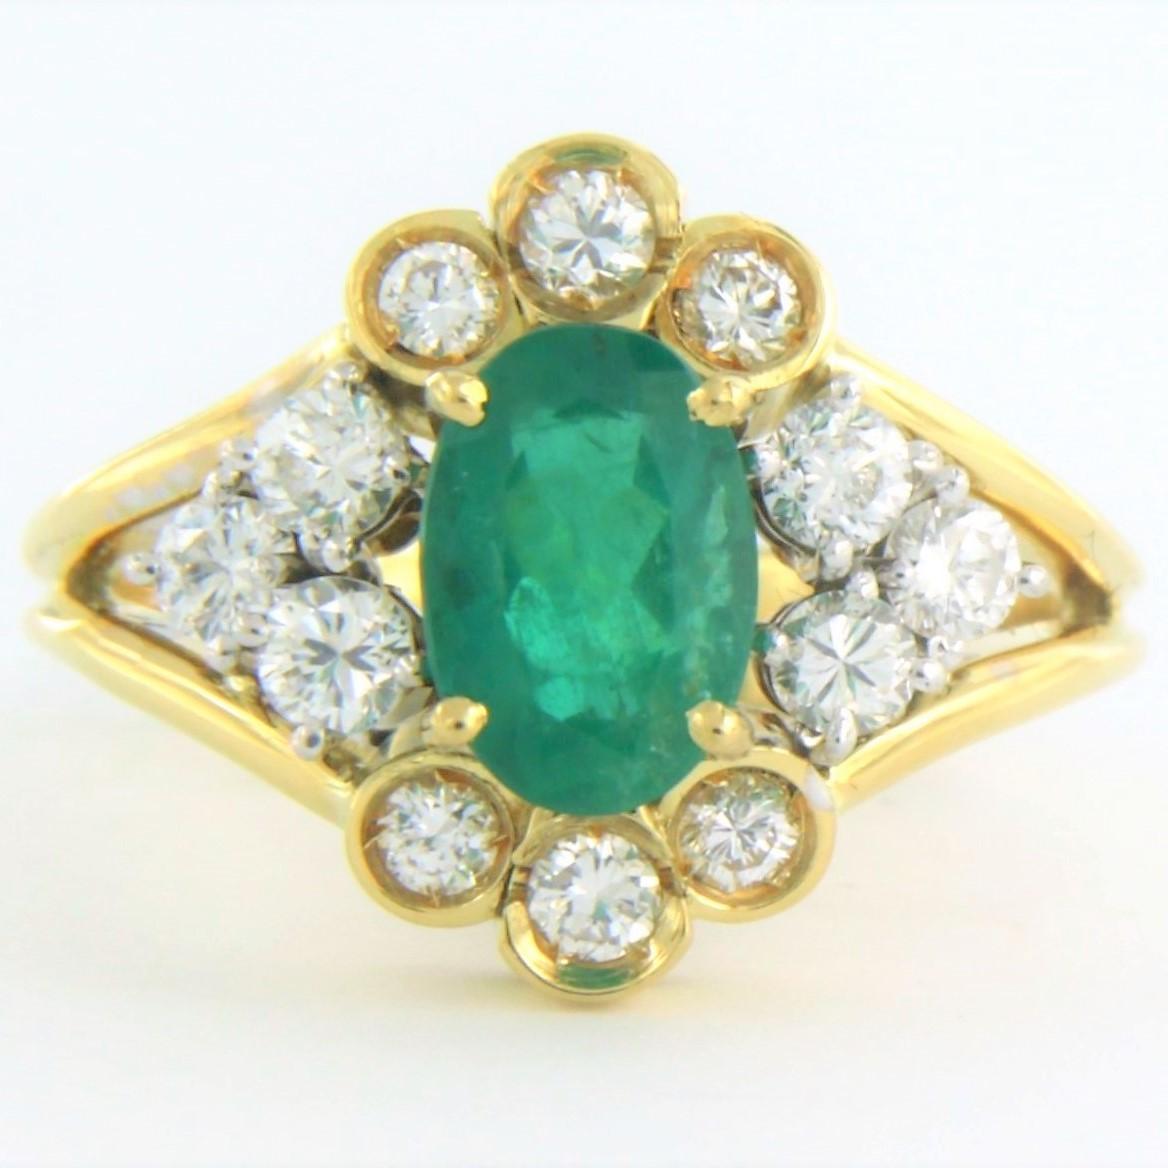 18k bicolour gold ring set with emerald to. 1.20ct and brilliant cut diamonds up to. 0.64ct - F/G - VS/SI - ring size U.S. 6.5 - EU. 17(53)

detailed description:

the top of the ring is 1.5 cm wide

Ring size U.S. 6.5 - EU. 17(53), ring can be